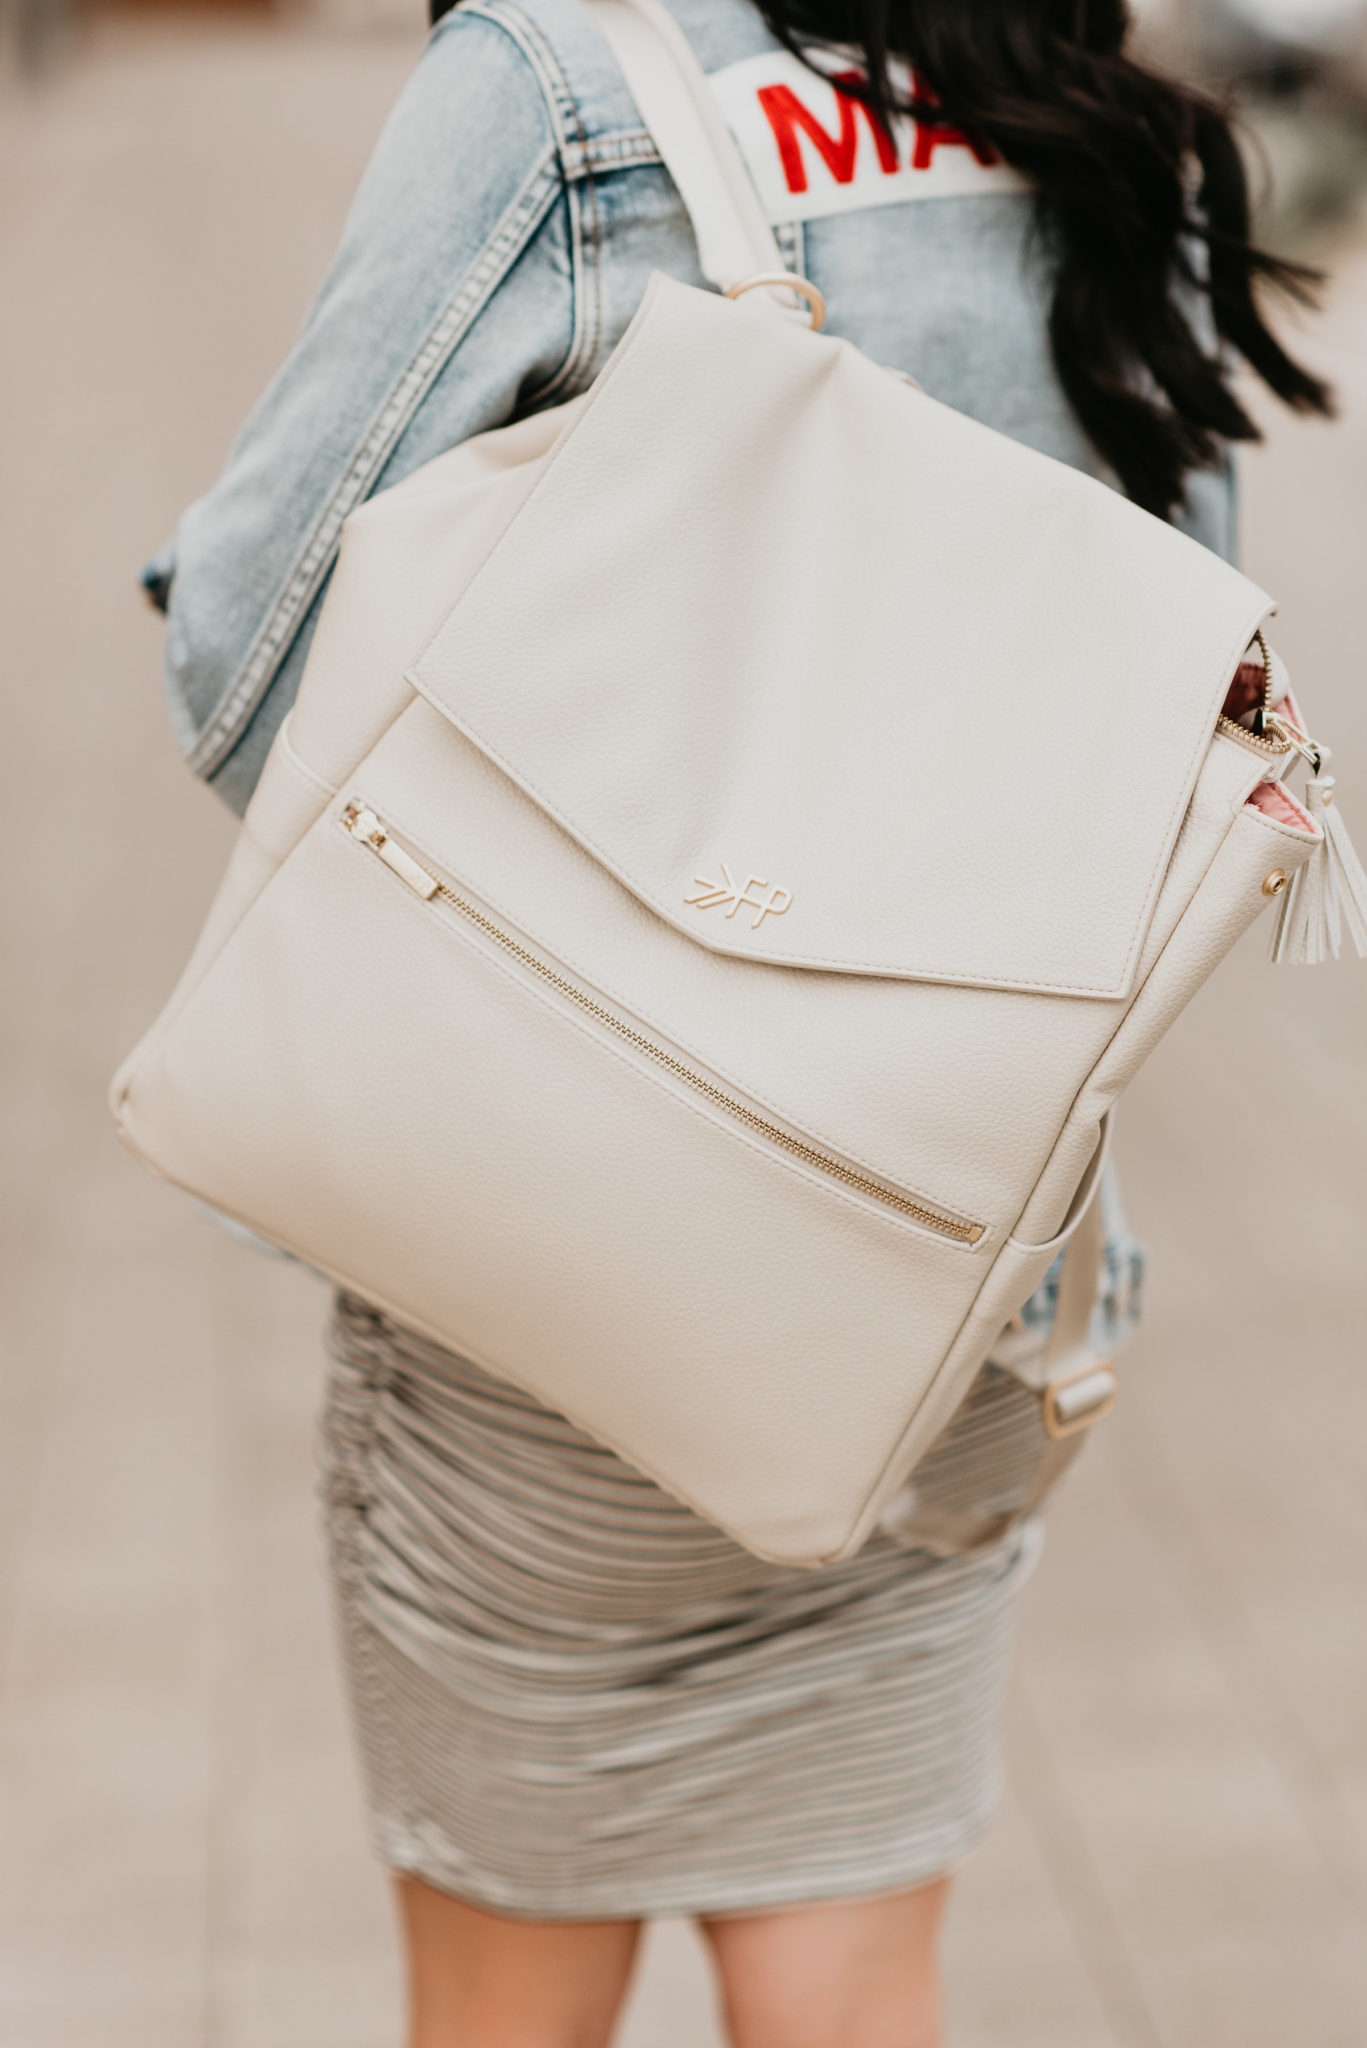 Diaper Bag Essentials by popular Las Vegas blogger and expecting mom Outfits & Outings